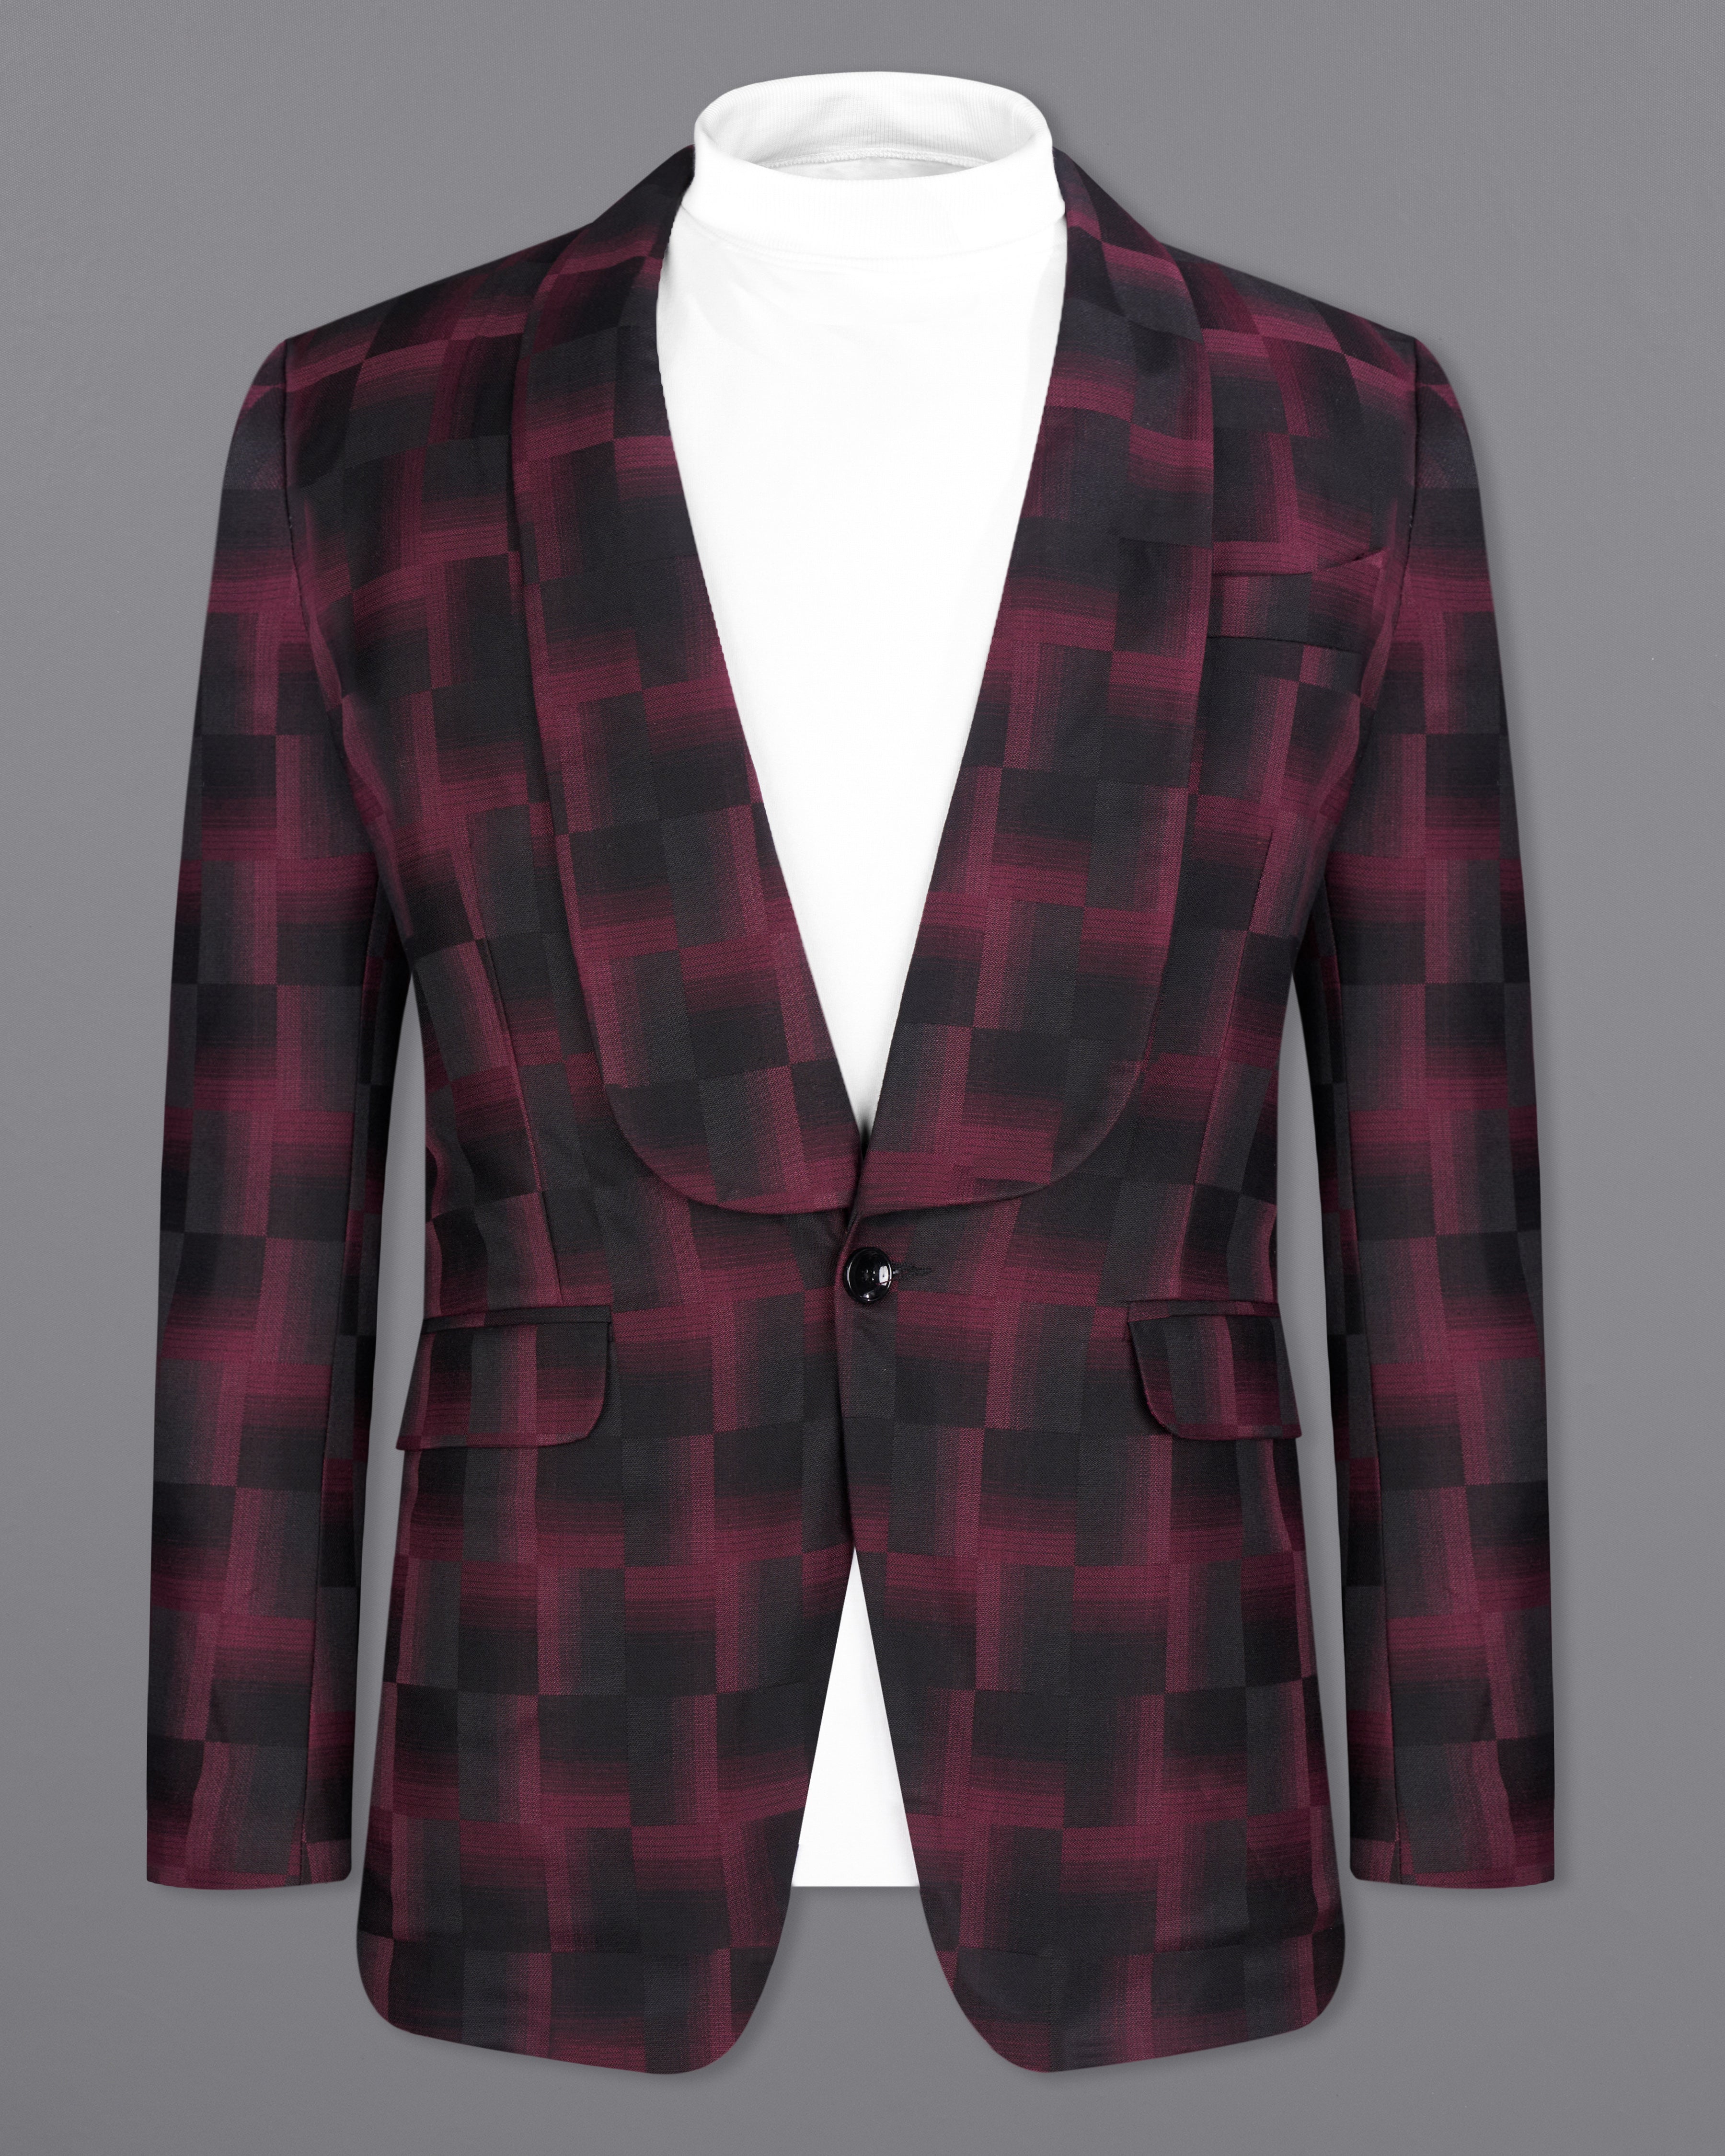 Jade Black with Finn Red Square Textured Designer Blazer BL2603-D139-36, BL2603-D139-38, BL2603-D139-40, BL2603-D139-42, BL2603-D139-44, BL2603-D139-46, BL2603-D139-48, BL2603-D139-50, BL2603-D139-52, BL2603-D139-54, BL2603-D139-56, BL2603-D139-58, BL2603-D139-60